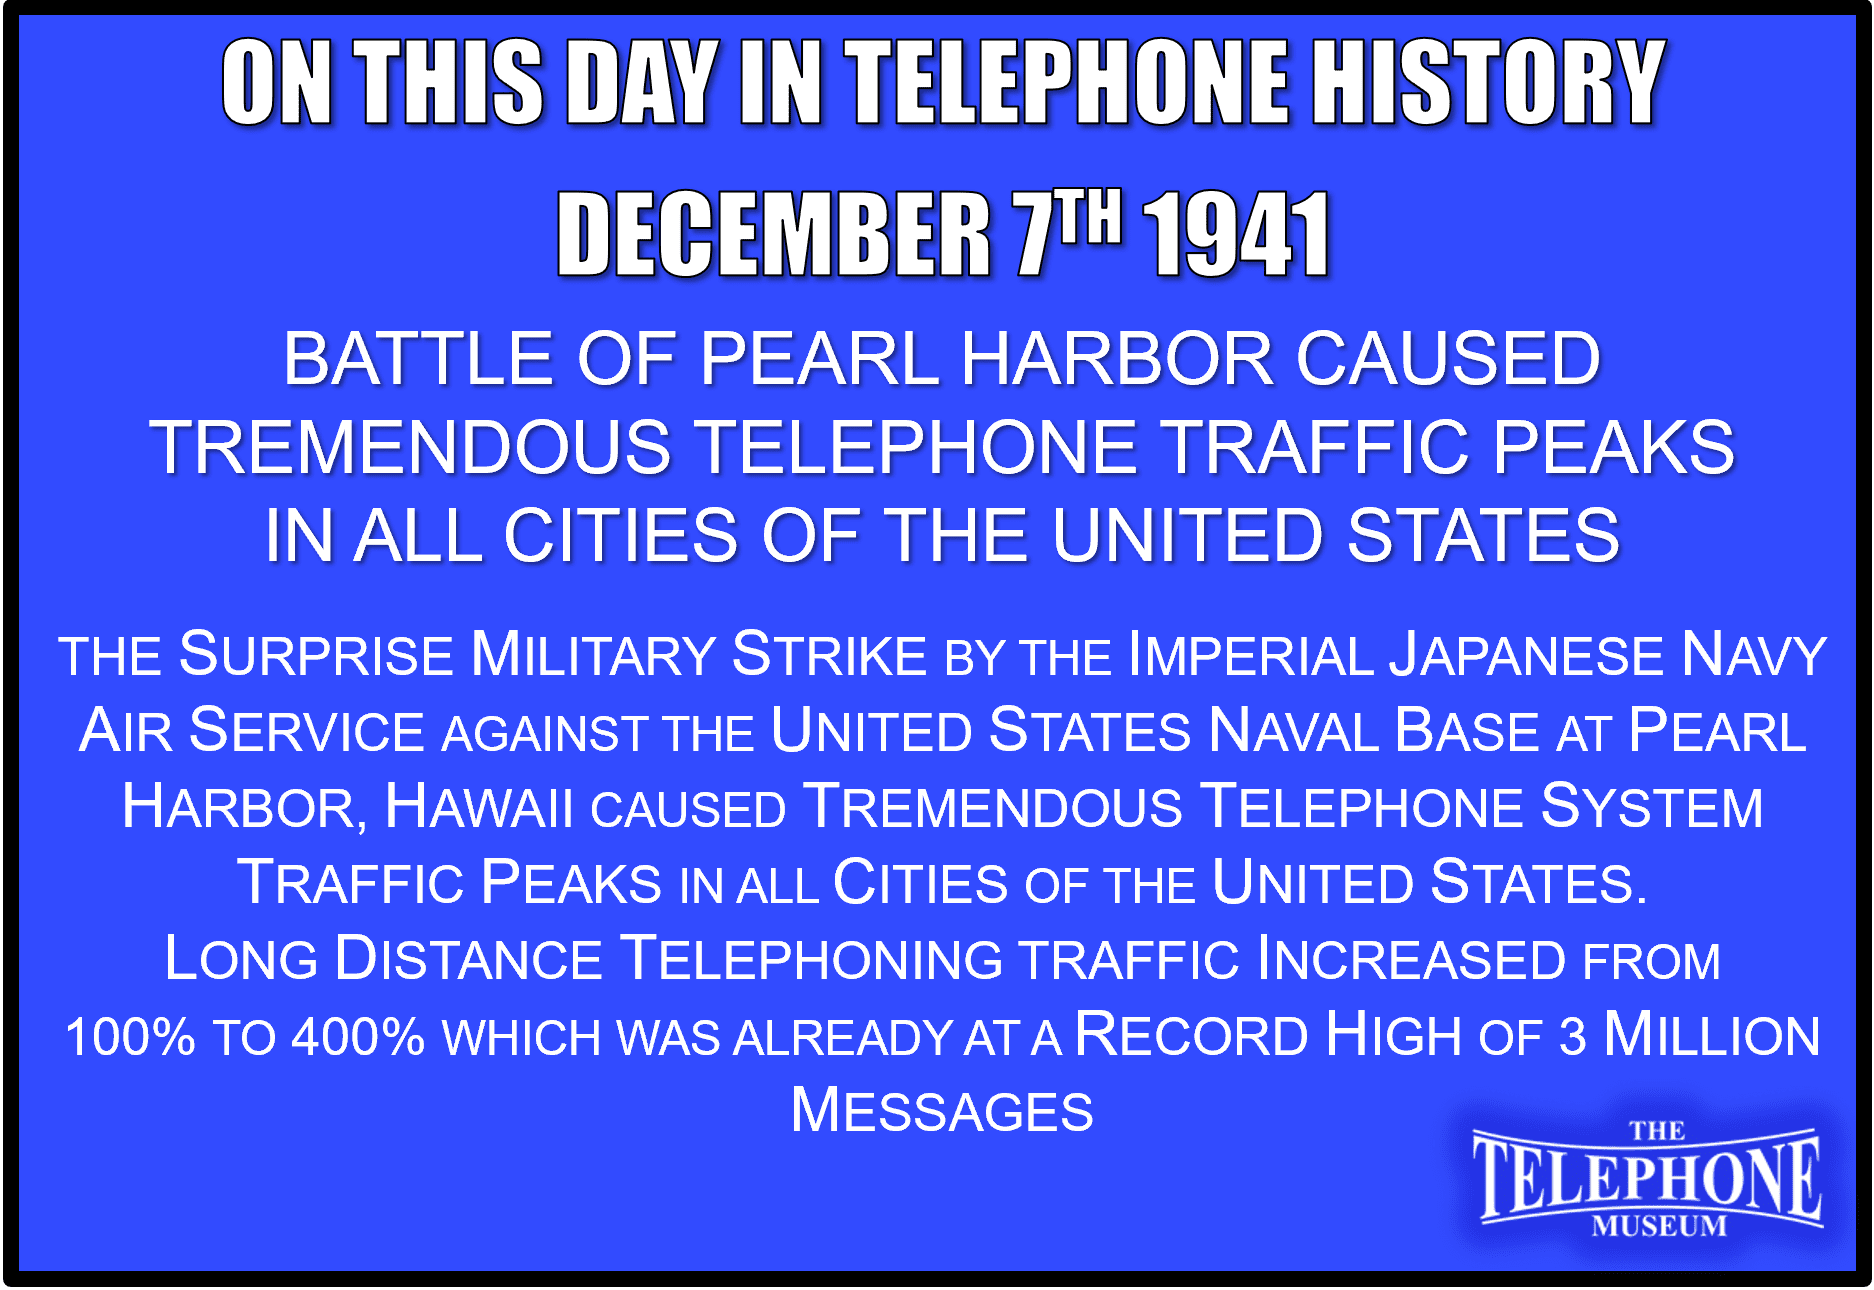 On This Day in Telephone History December 7TH 1941 Battle of Pearl Harbor Caused Tremendous Telephone Traffic Peaks in all Cities of the United States. The surprise military strike by the Imperial Japanese Navy Air Service against the United States naval base at Pearl Harbor, Hawaii caused tremendous telephone system traffic peaks in all cities of the United States. Long distance telephoning traffic increased from 100% to 400% which was already at a record high of 3 million messages.